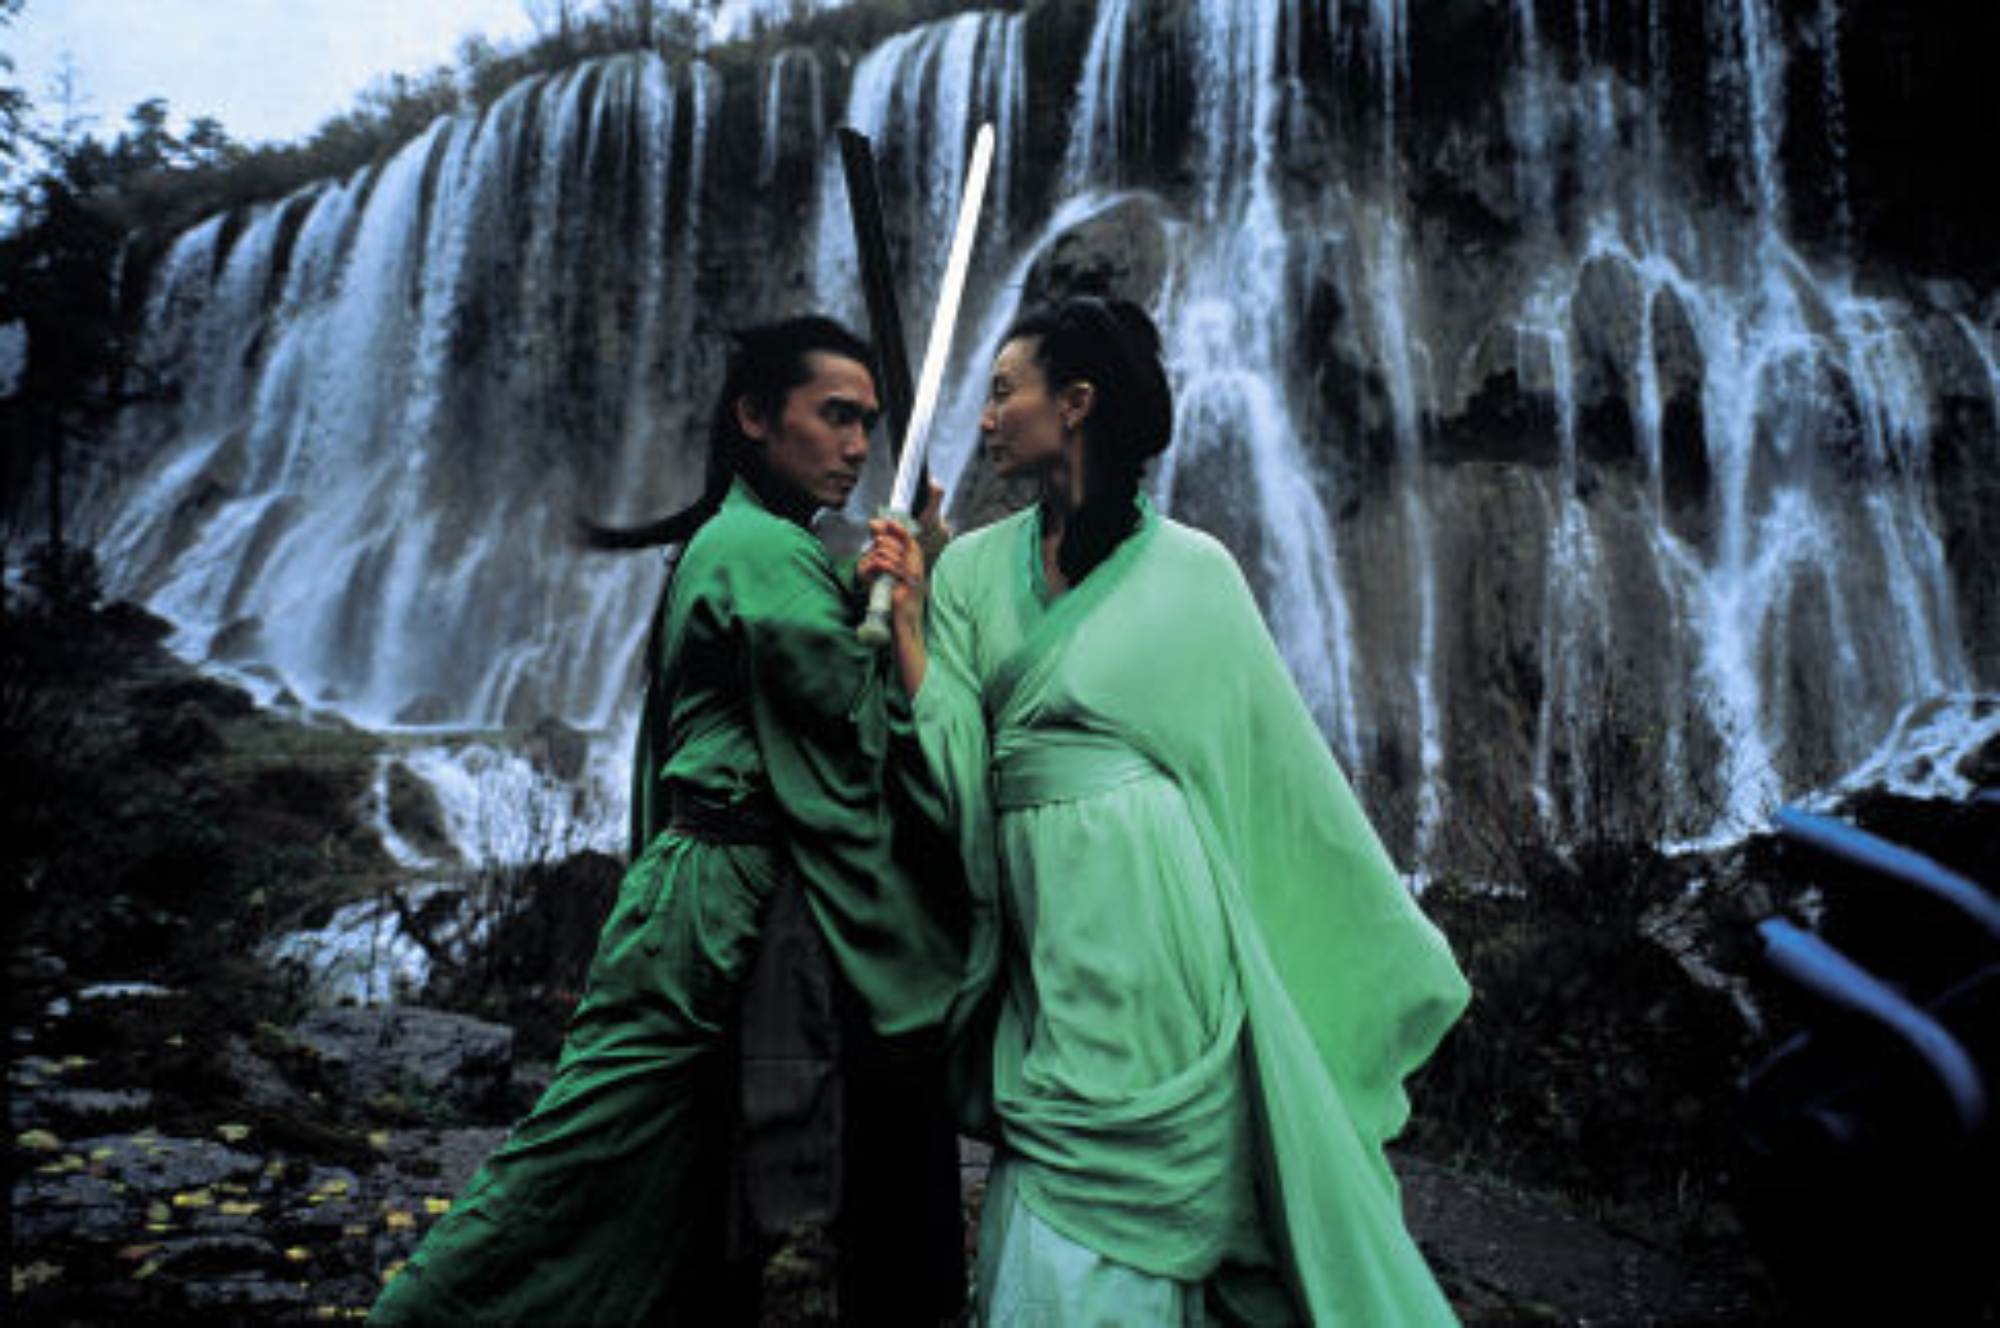 'Hero' Maggie Cheung as Flying Snow as and Tony Leung Chiu-wai as Broken Sword locking eyes in combat in front of a waterfall